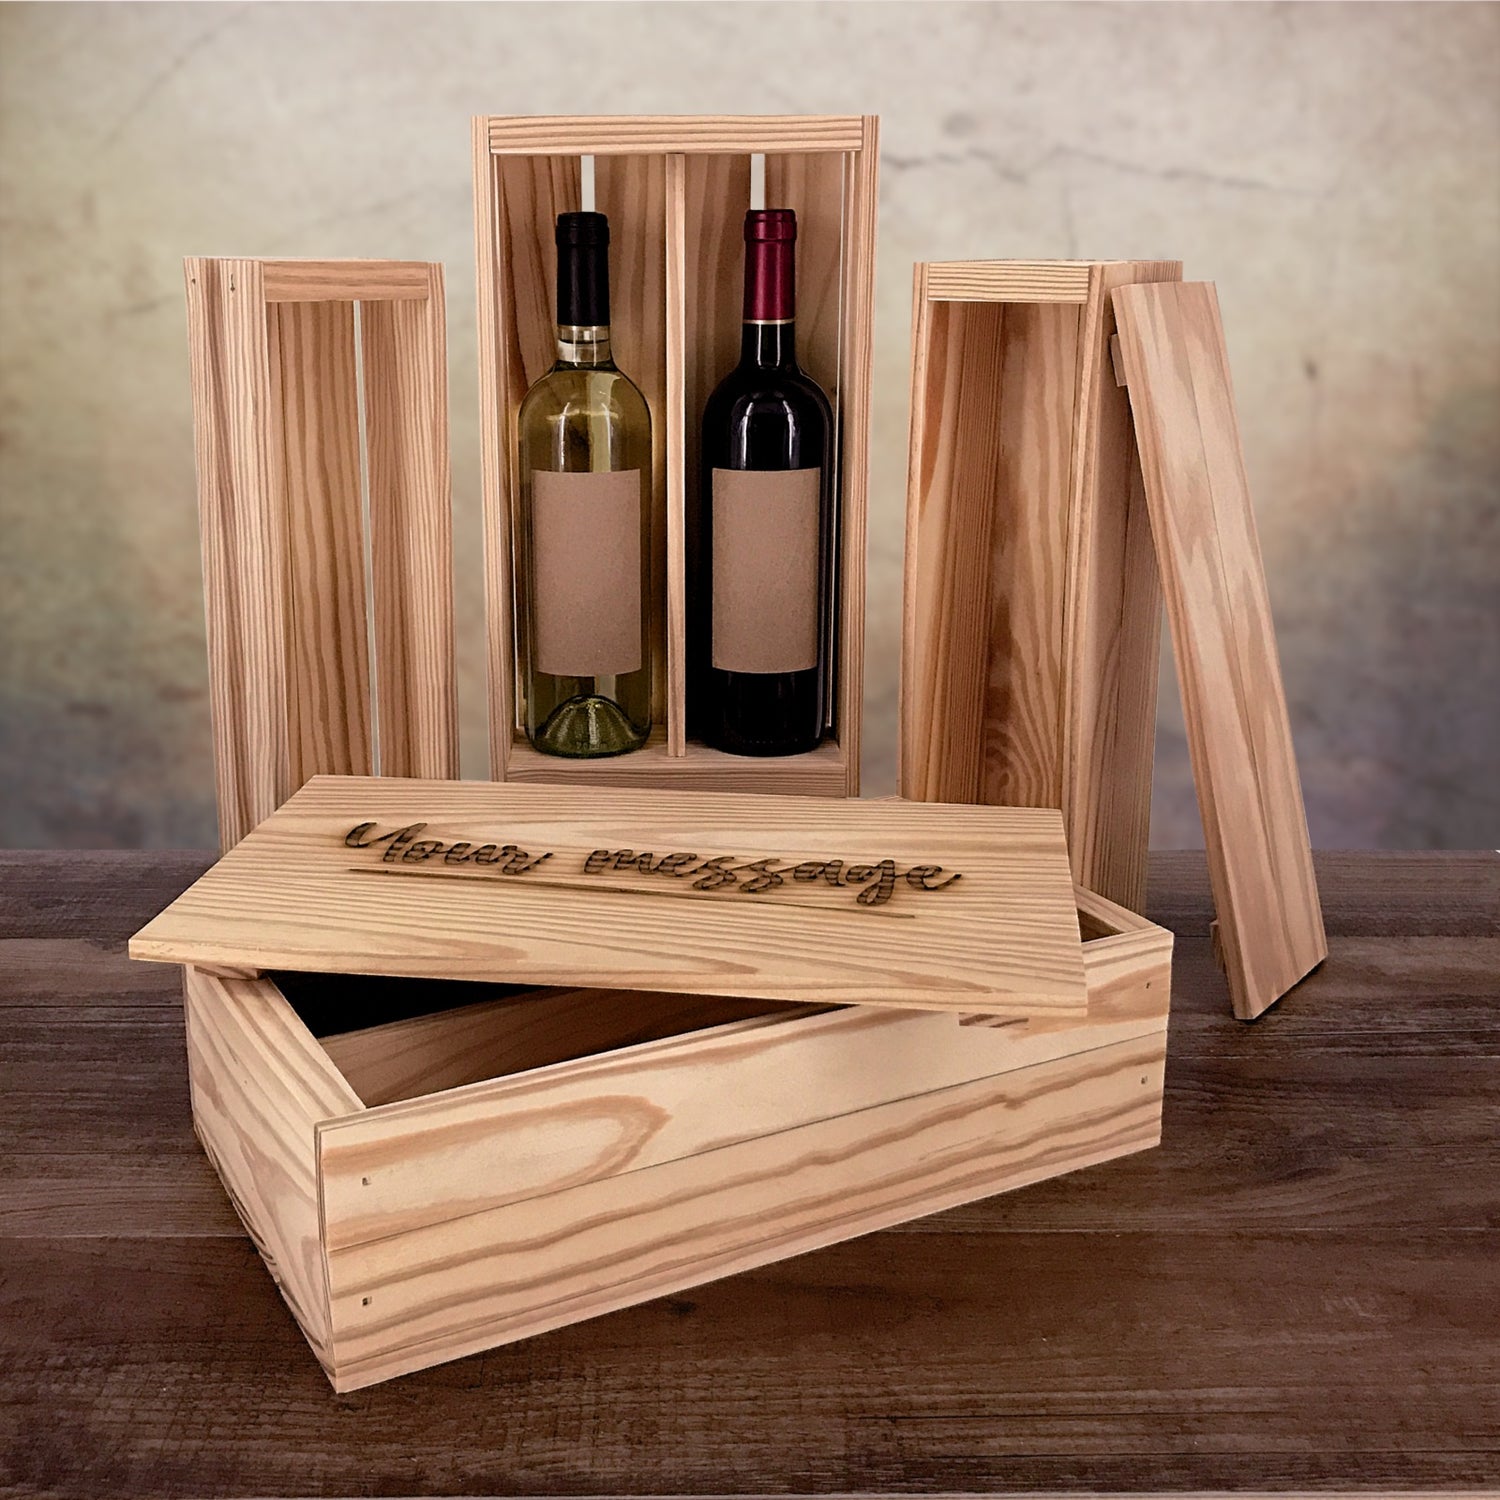 Wine bottle wood crates and boxes by Carpenter Core